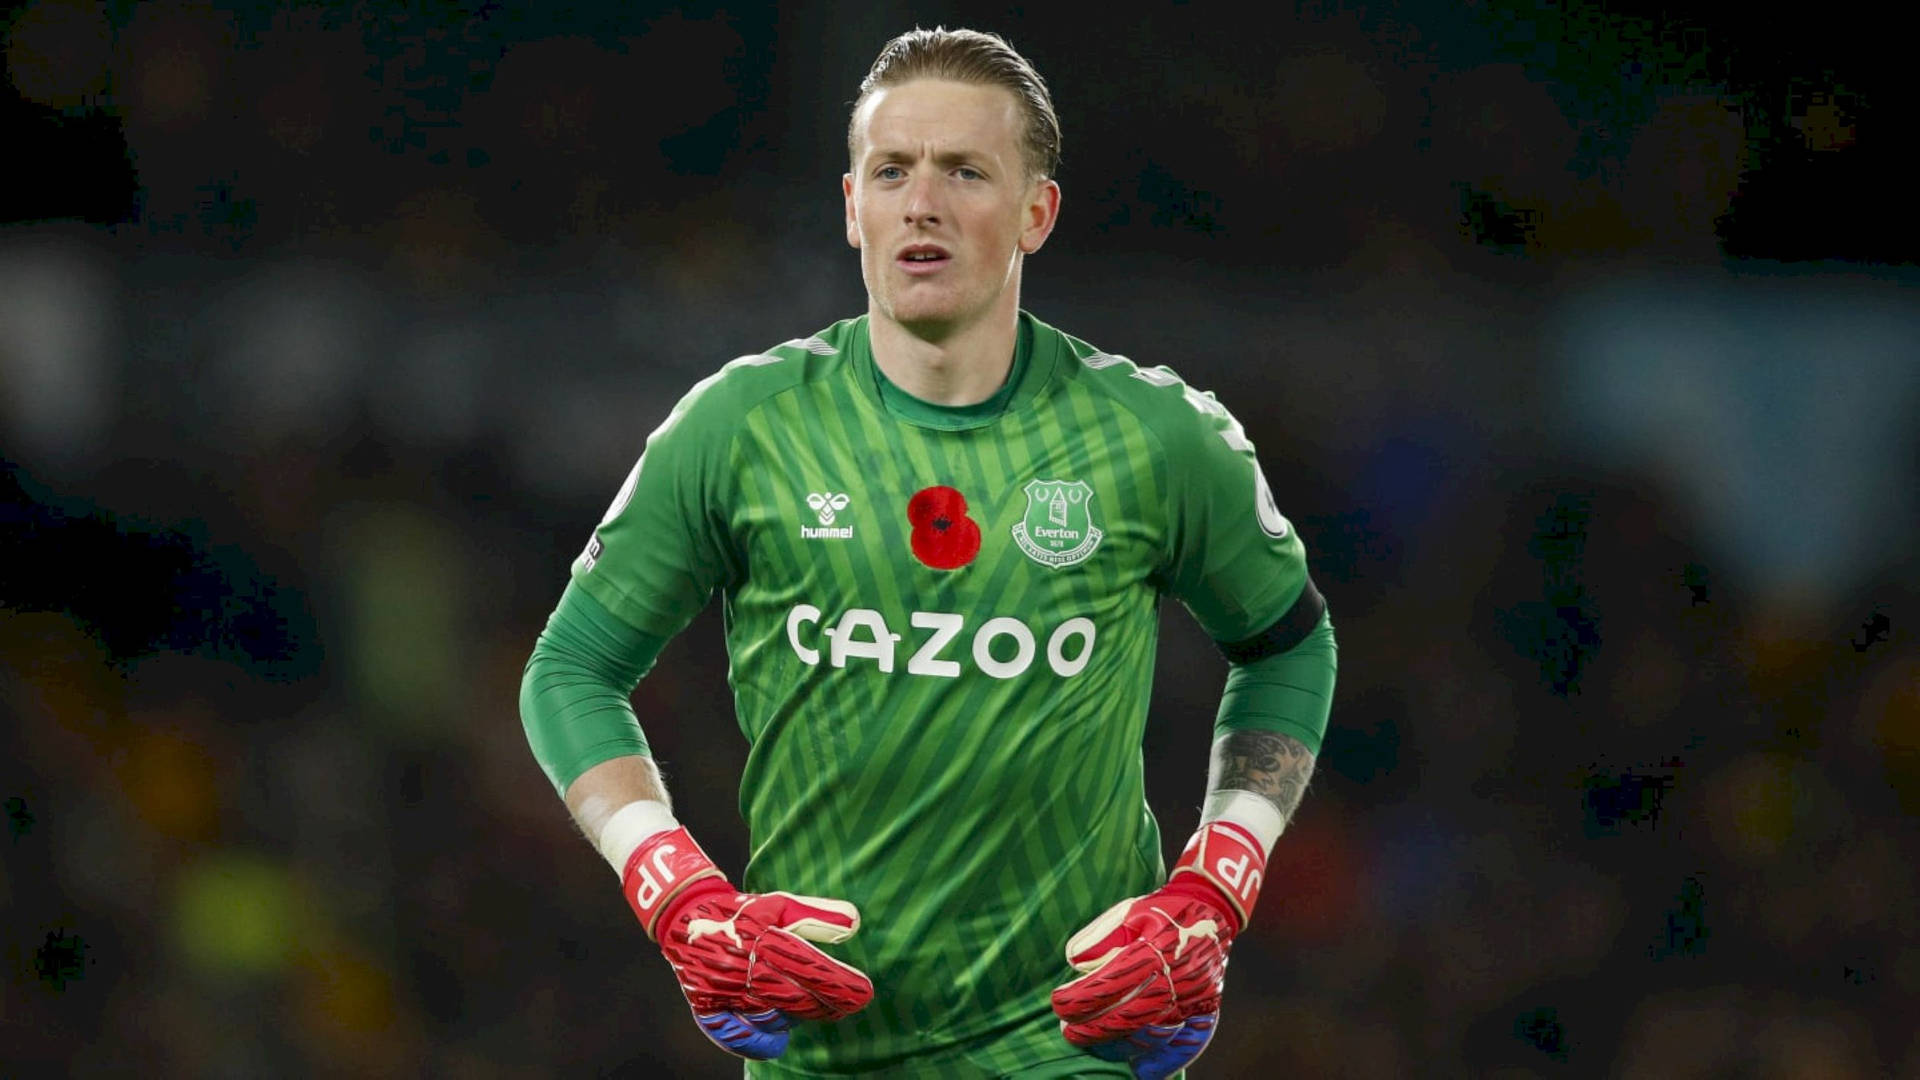 Jordan Pickford Wearing Green And Red Background